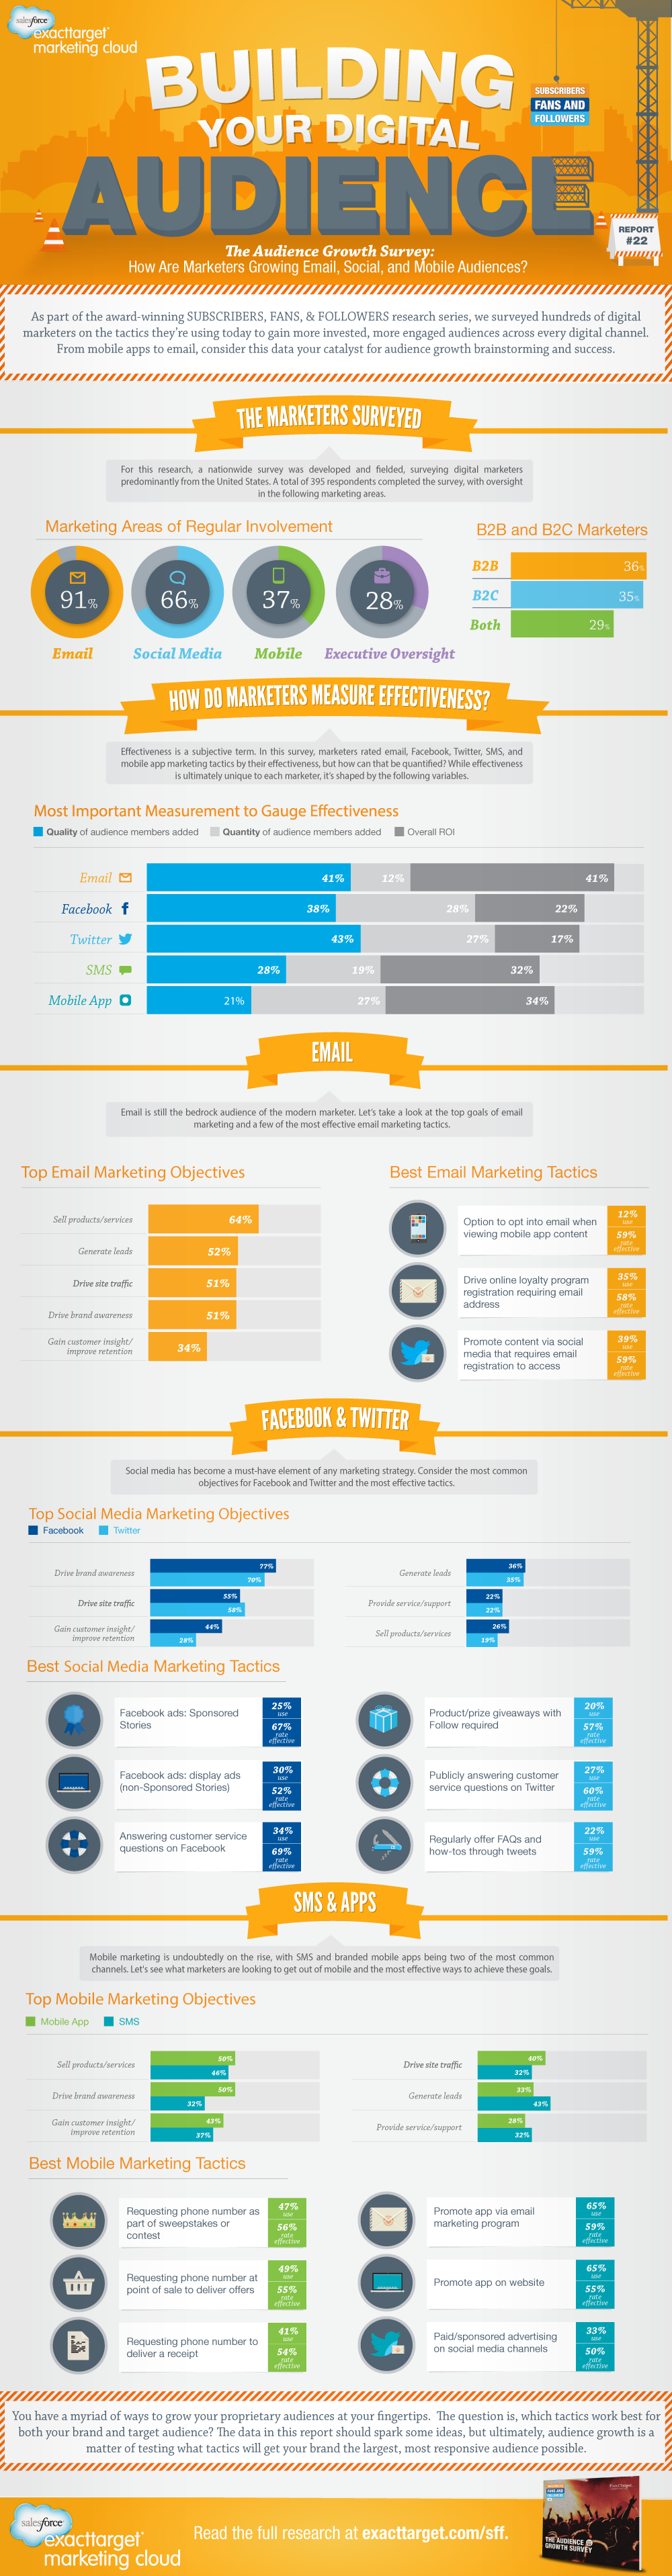 How to Grow Your Email, Mobile, & Social Audiences [INFOGRAPHIC] - An Infographic from Pardot